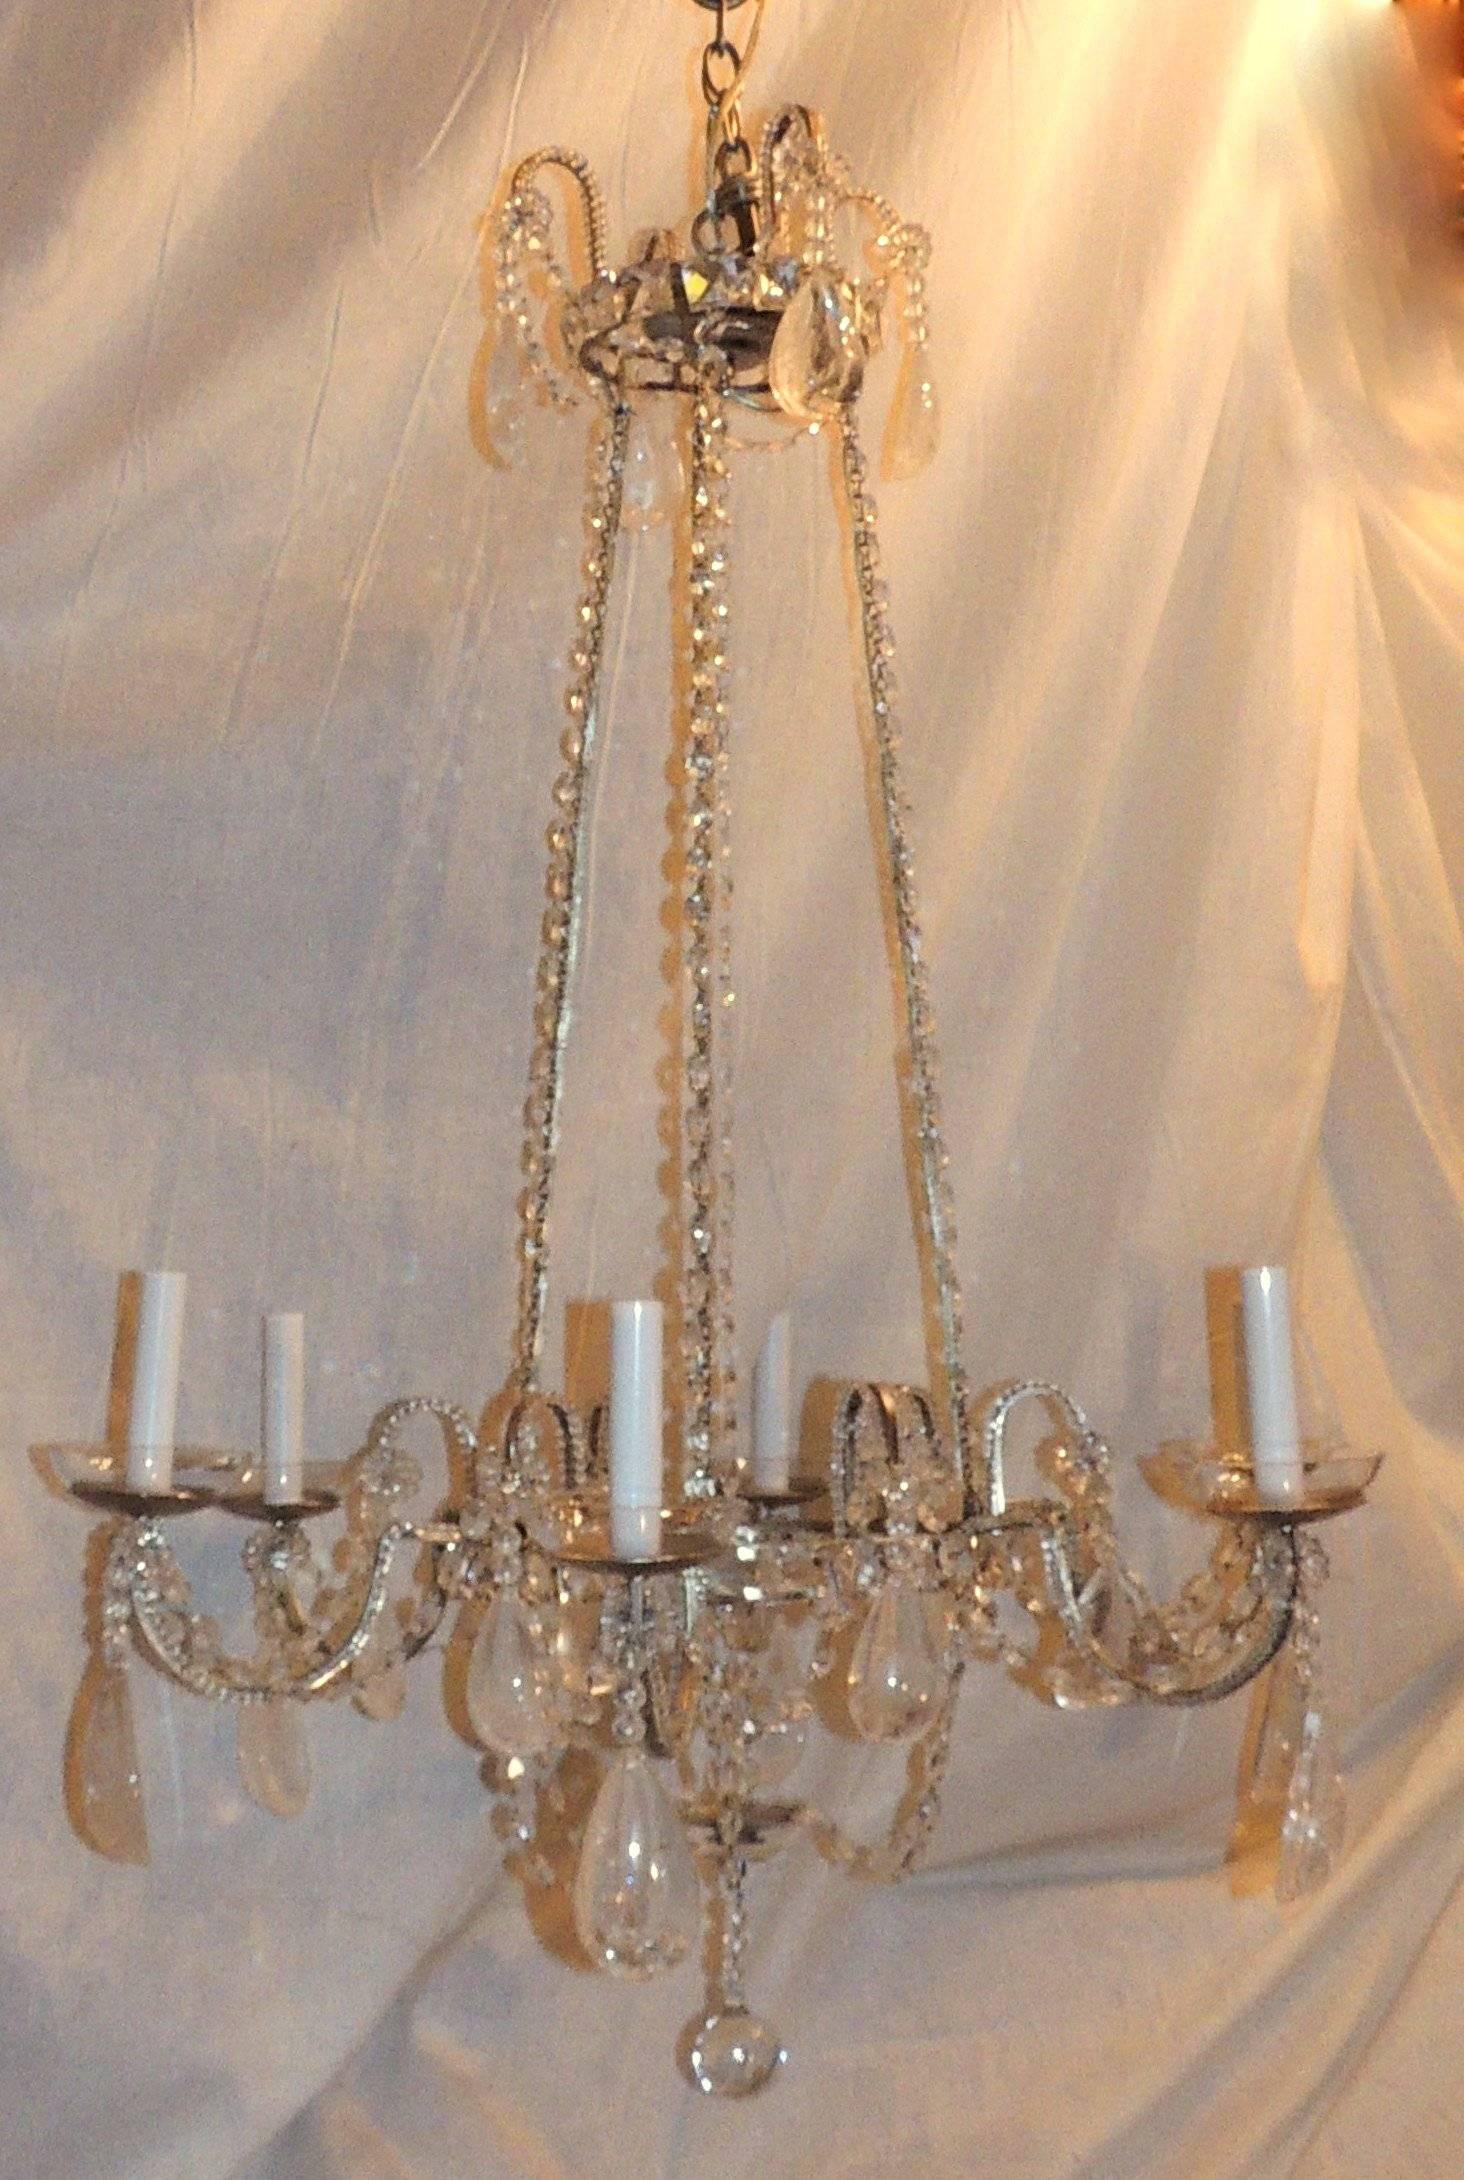 The crystal beads trim the silver body and arms of this rock crystal six-arm chandelier. The crystal chain suspends the lower portion and glass crystal candle cup add to a light open look to this transitional chandelier.

Measures: 38